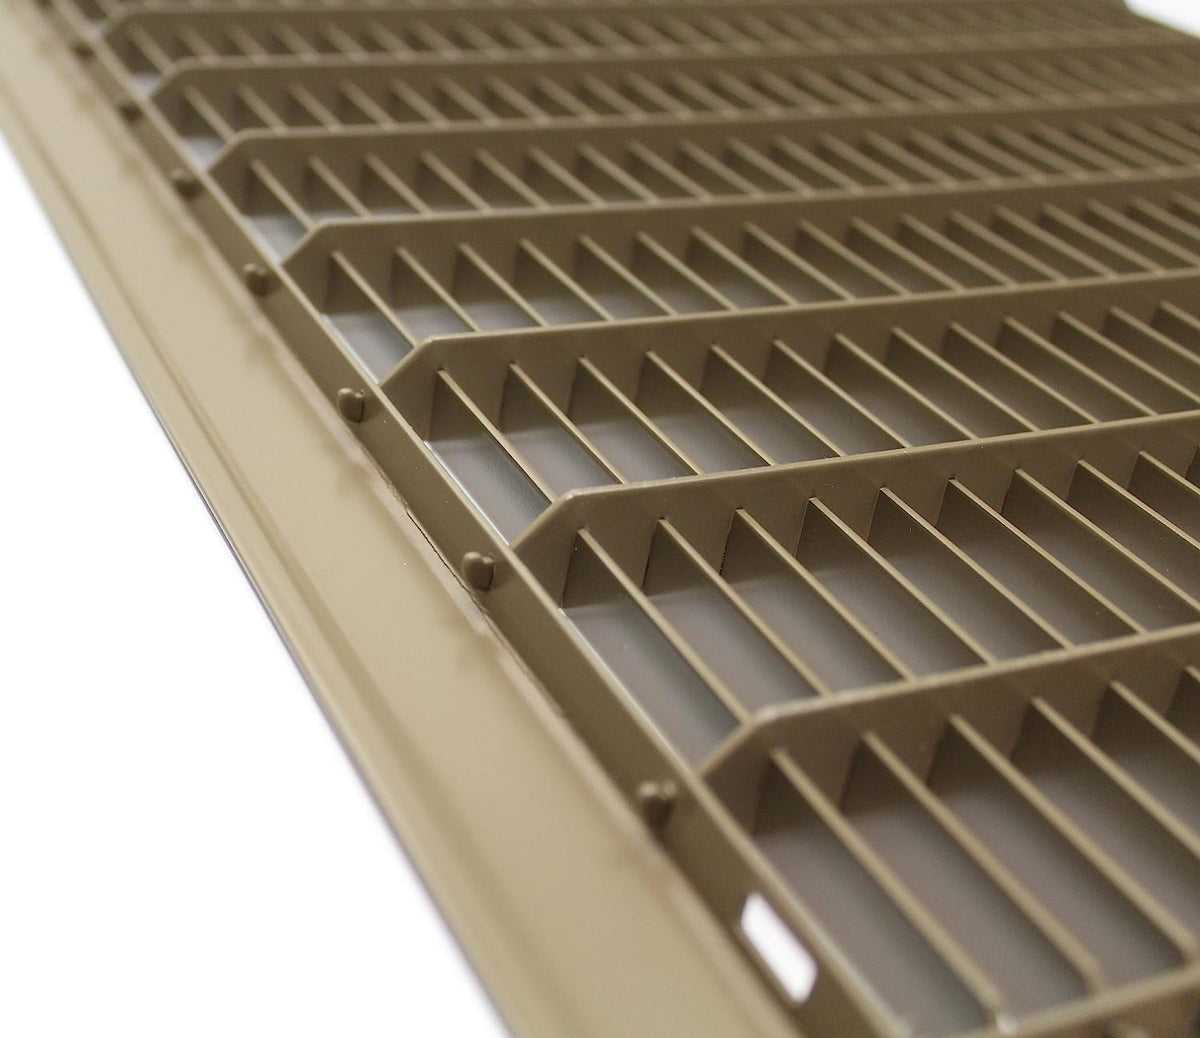 10&quot; X 16&quot; or 16&quot; X 10&quot; Heavy Duty Floor Grille - Fixed Blades Air Grille - Brown [Outer Dimensions: 11.75 X 17.75]